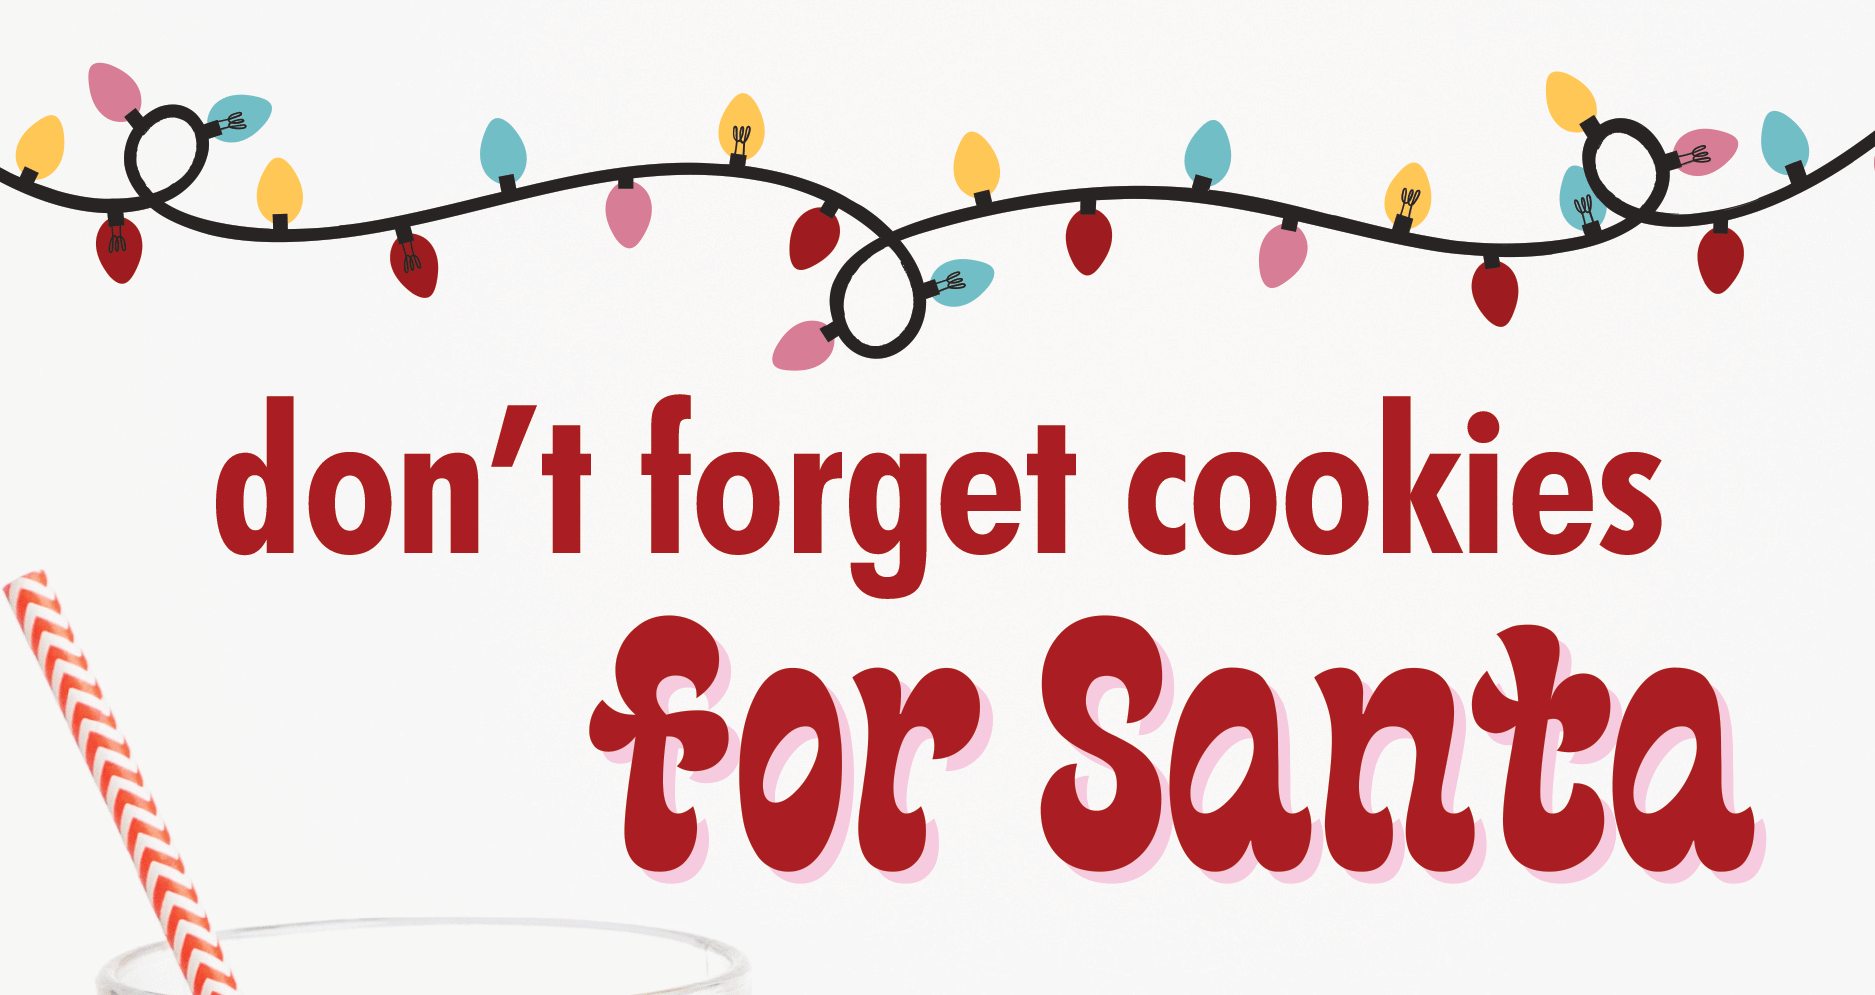 Don't forget cookies for Santa!